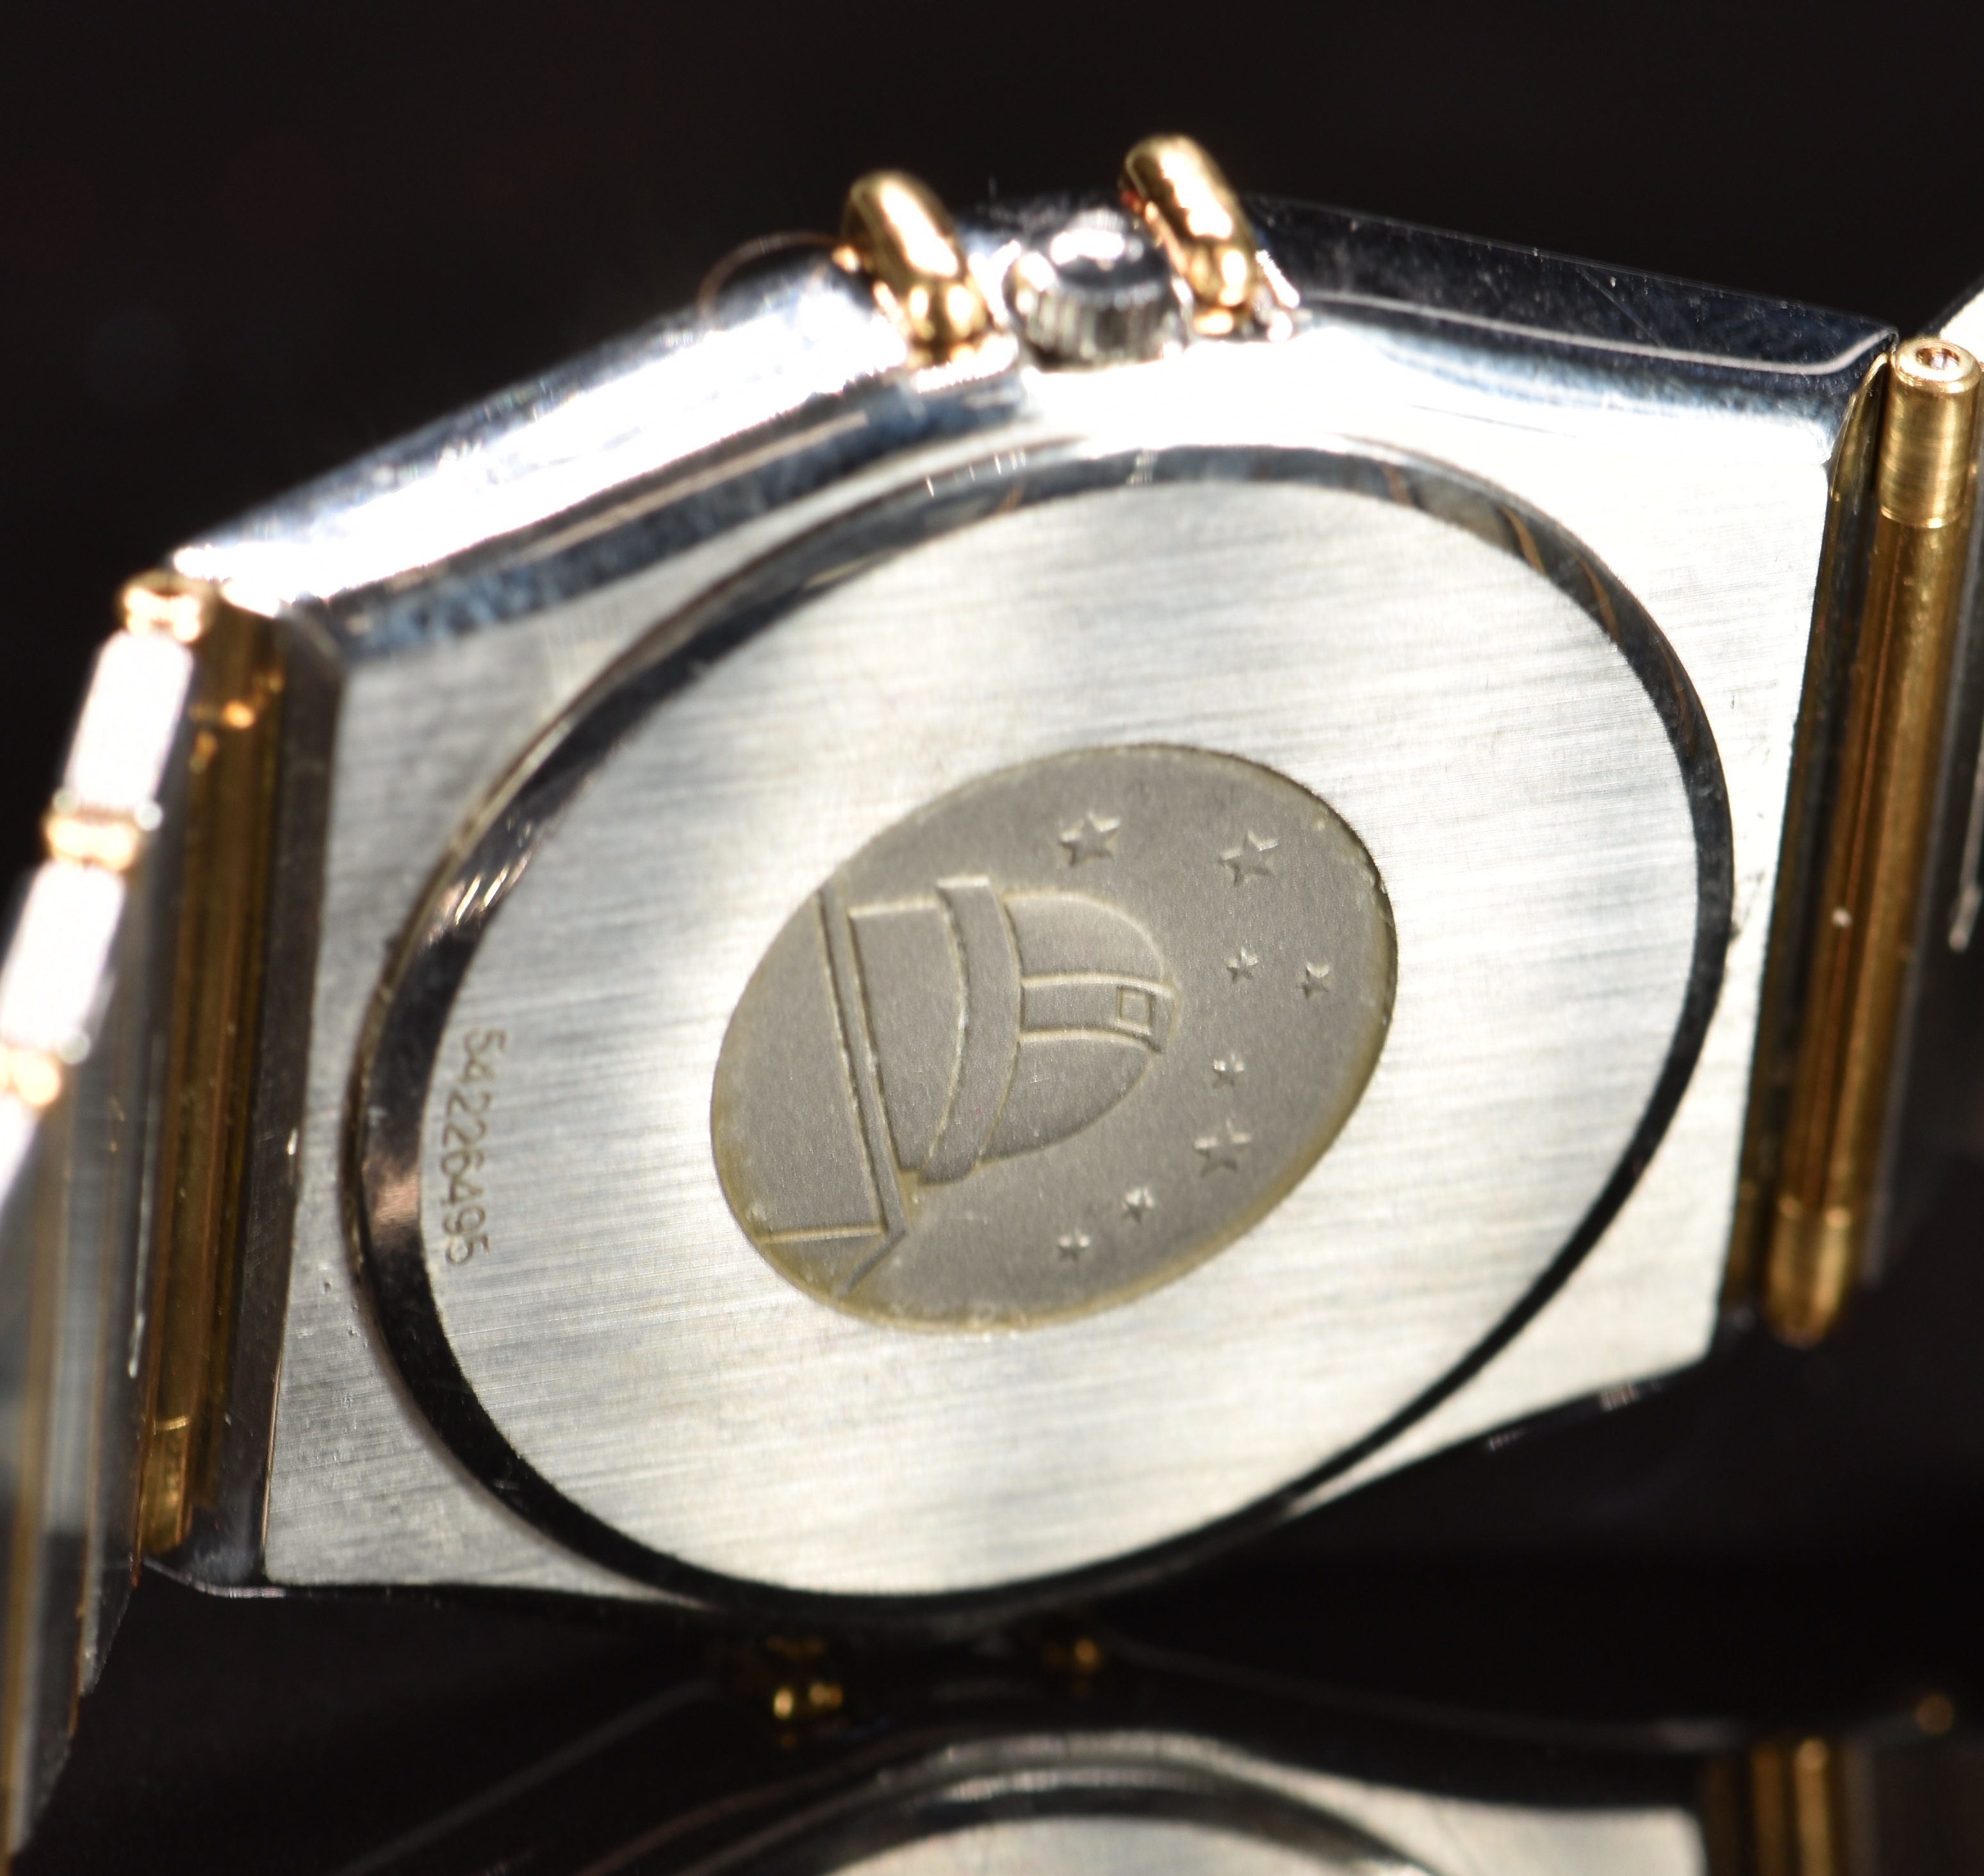 Omega Constellation gentleman's wristwatch with date aperture, luminous hands, gold dial, back Roman - Image 6 of 7